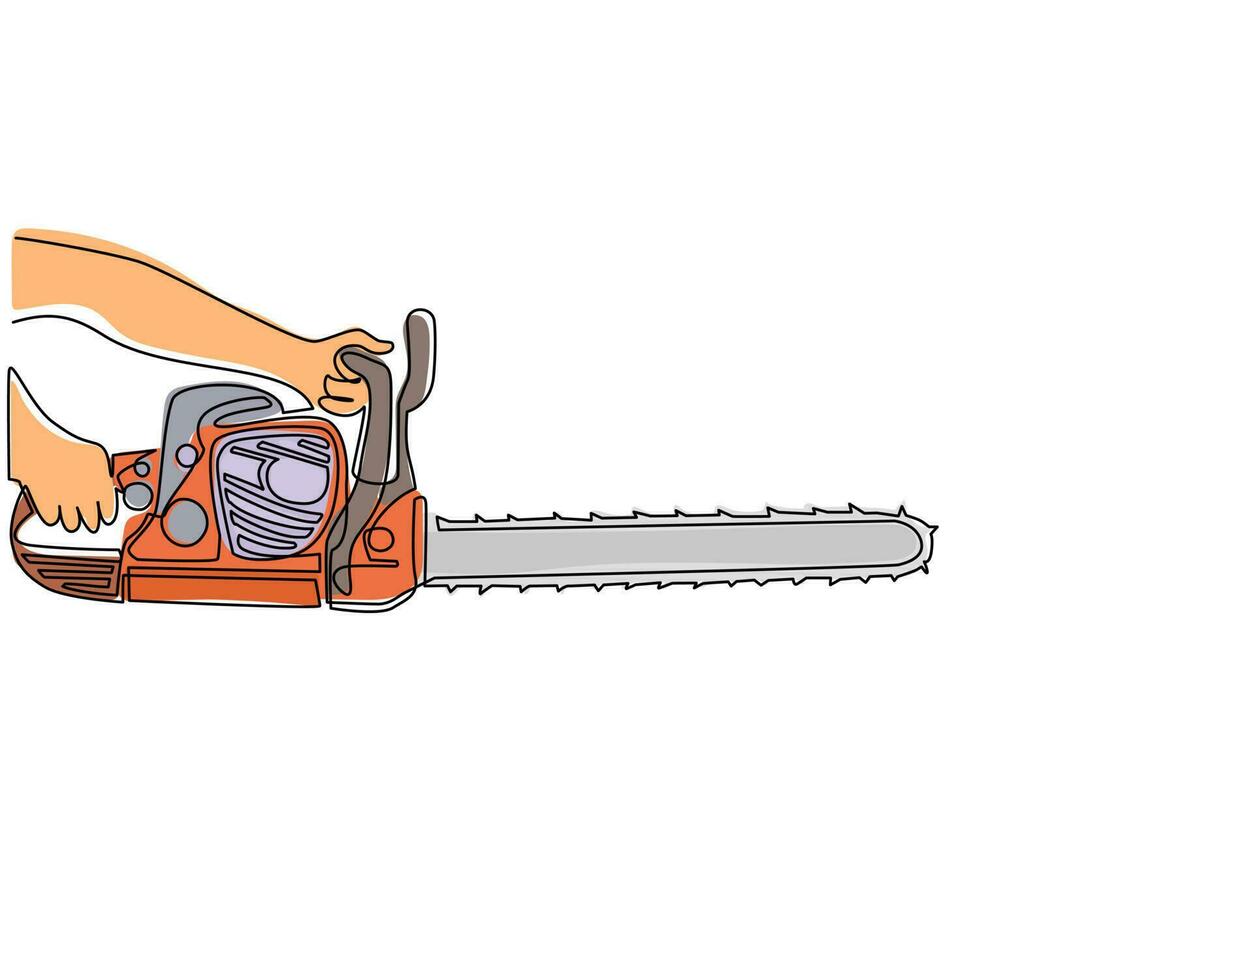 Single one line drawing hand holding chainsaw. Industry job equipment for strong man. Professional machine. Lumberjack tool. Woodcutter saw. Wood forester cutter. Continuous line draw design vector